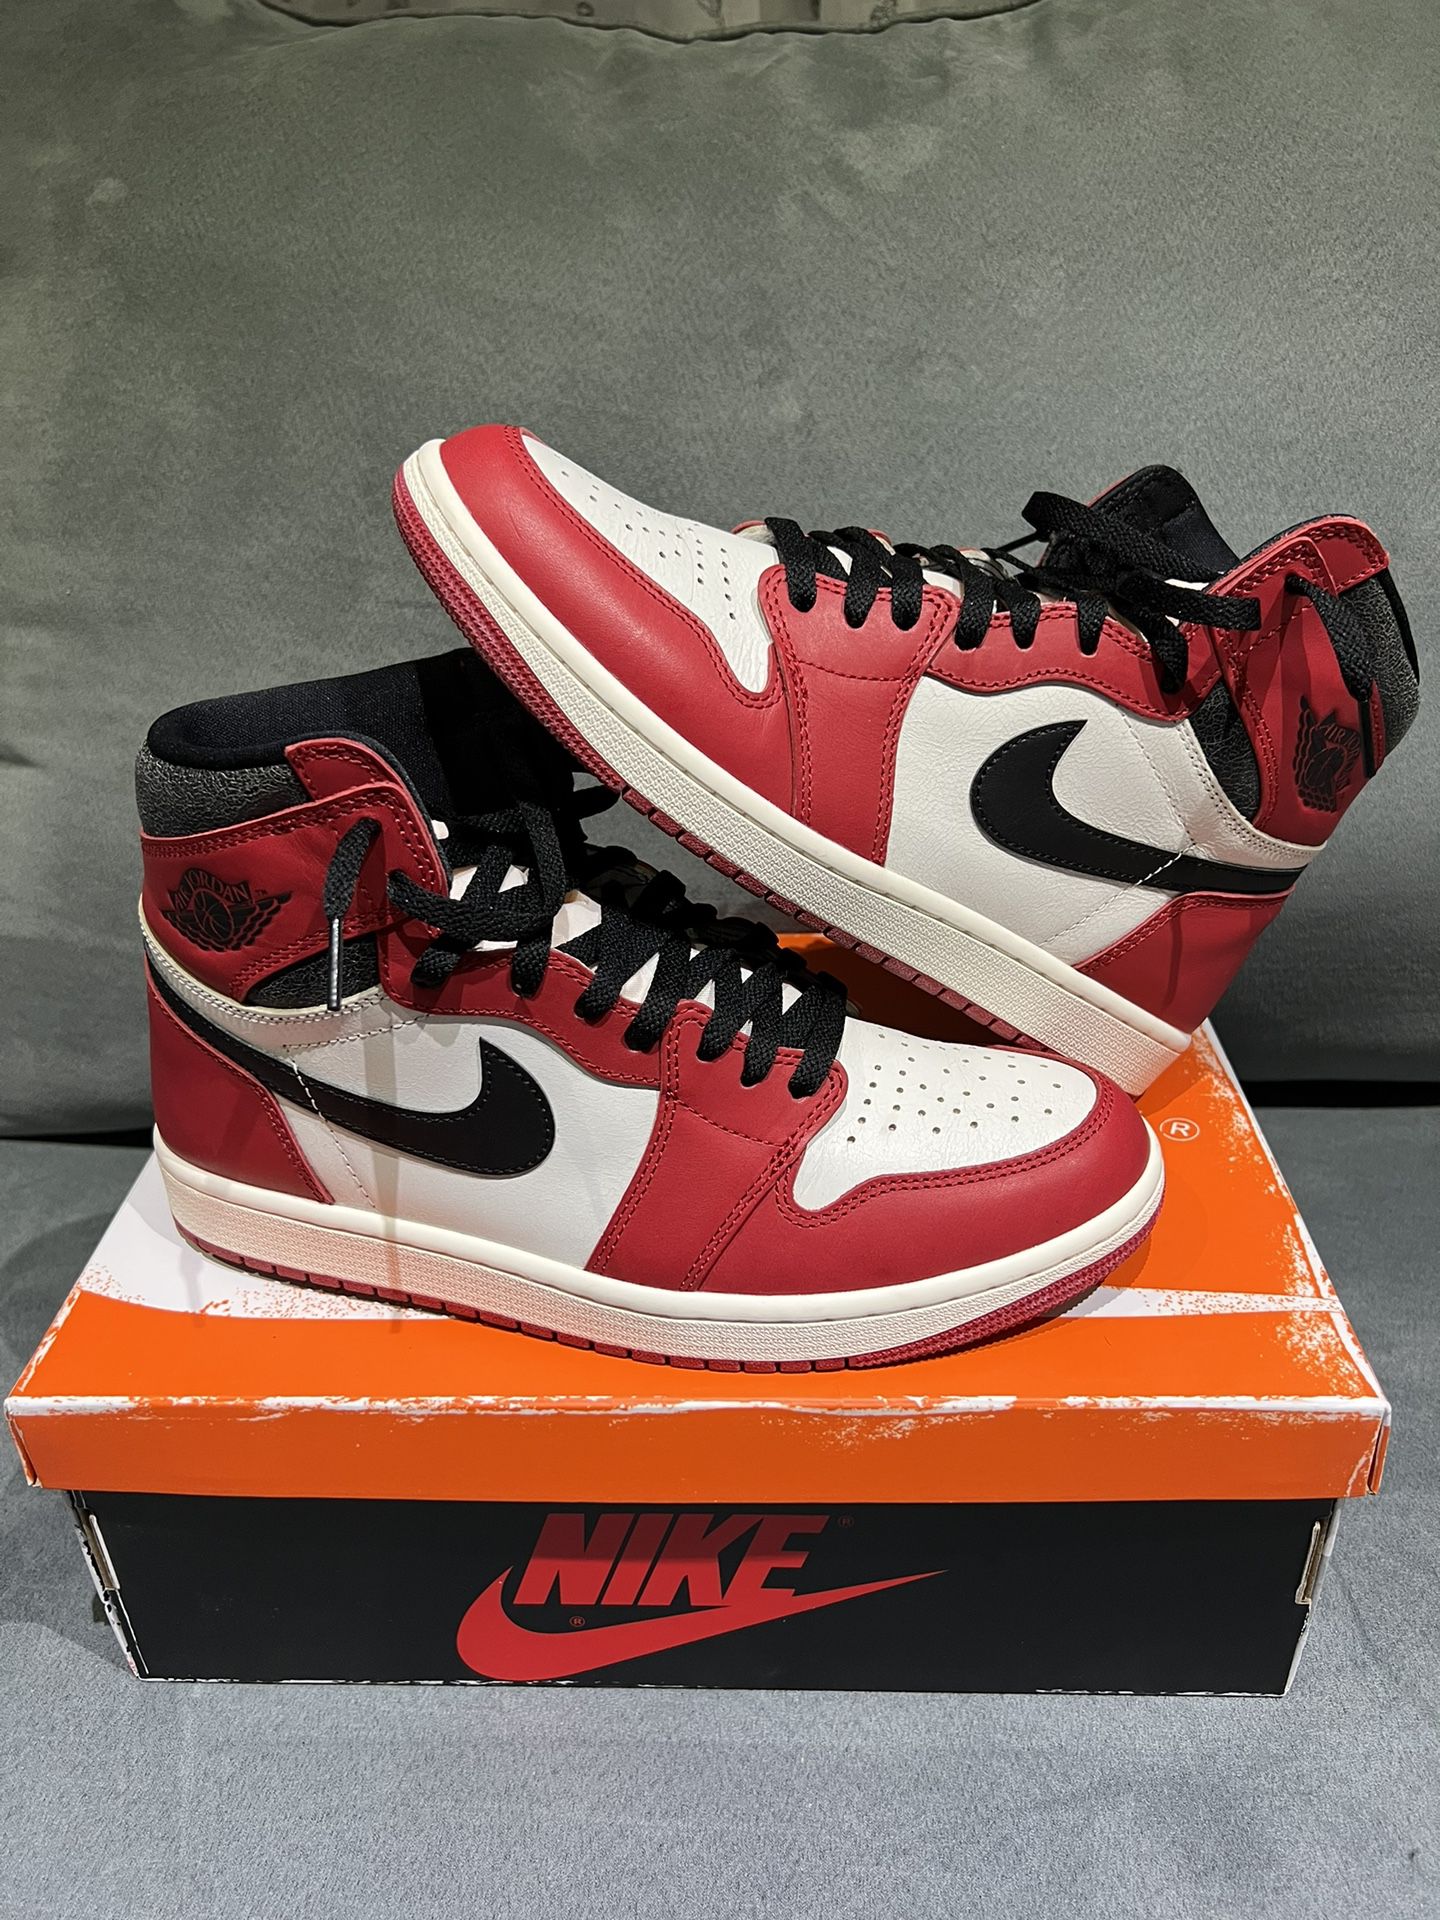 Air Jordan 1 Retro OG “Lost & Found” size 9.5M with box and receipt 